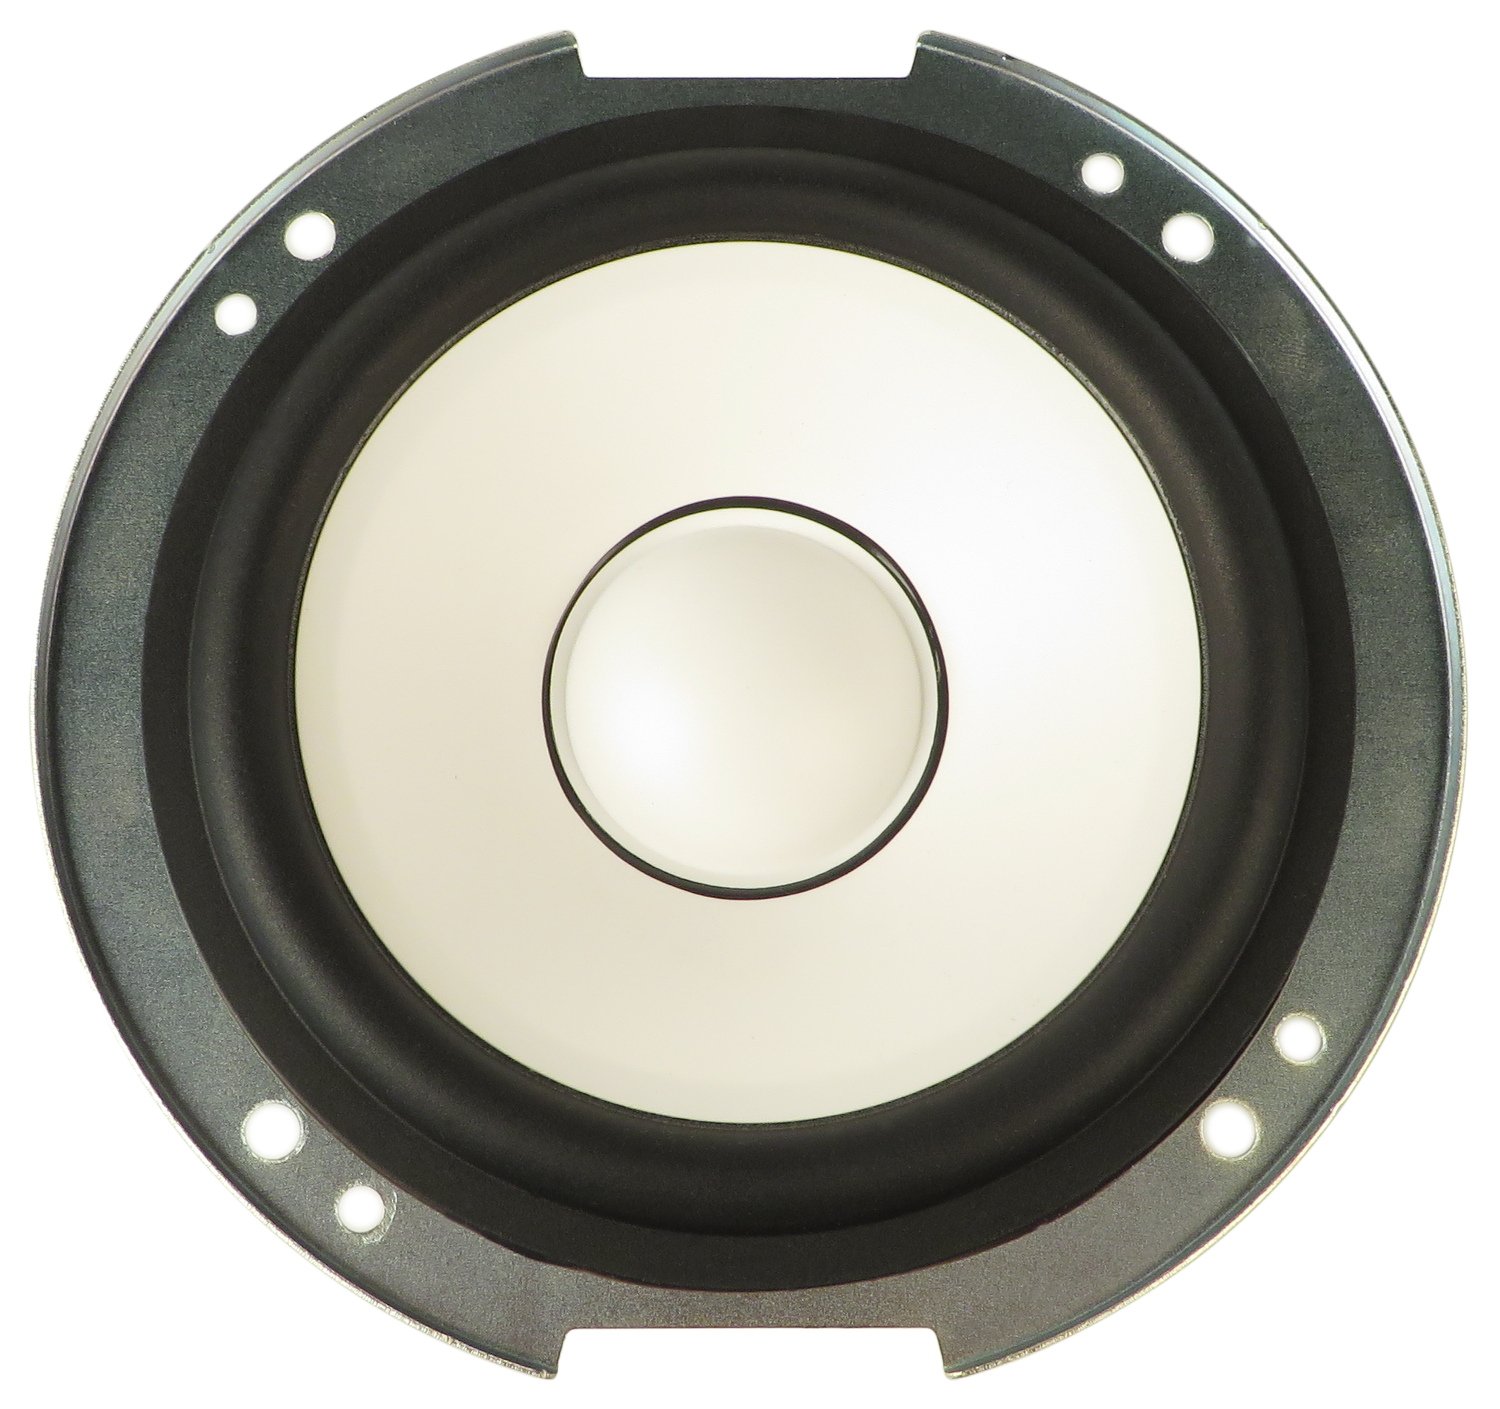 Yamaha YE739A00 5 Woofer for HS5